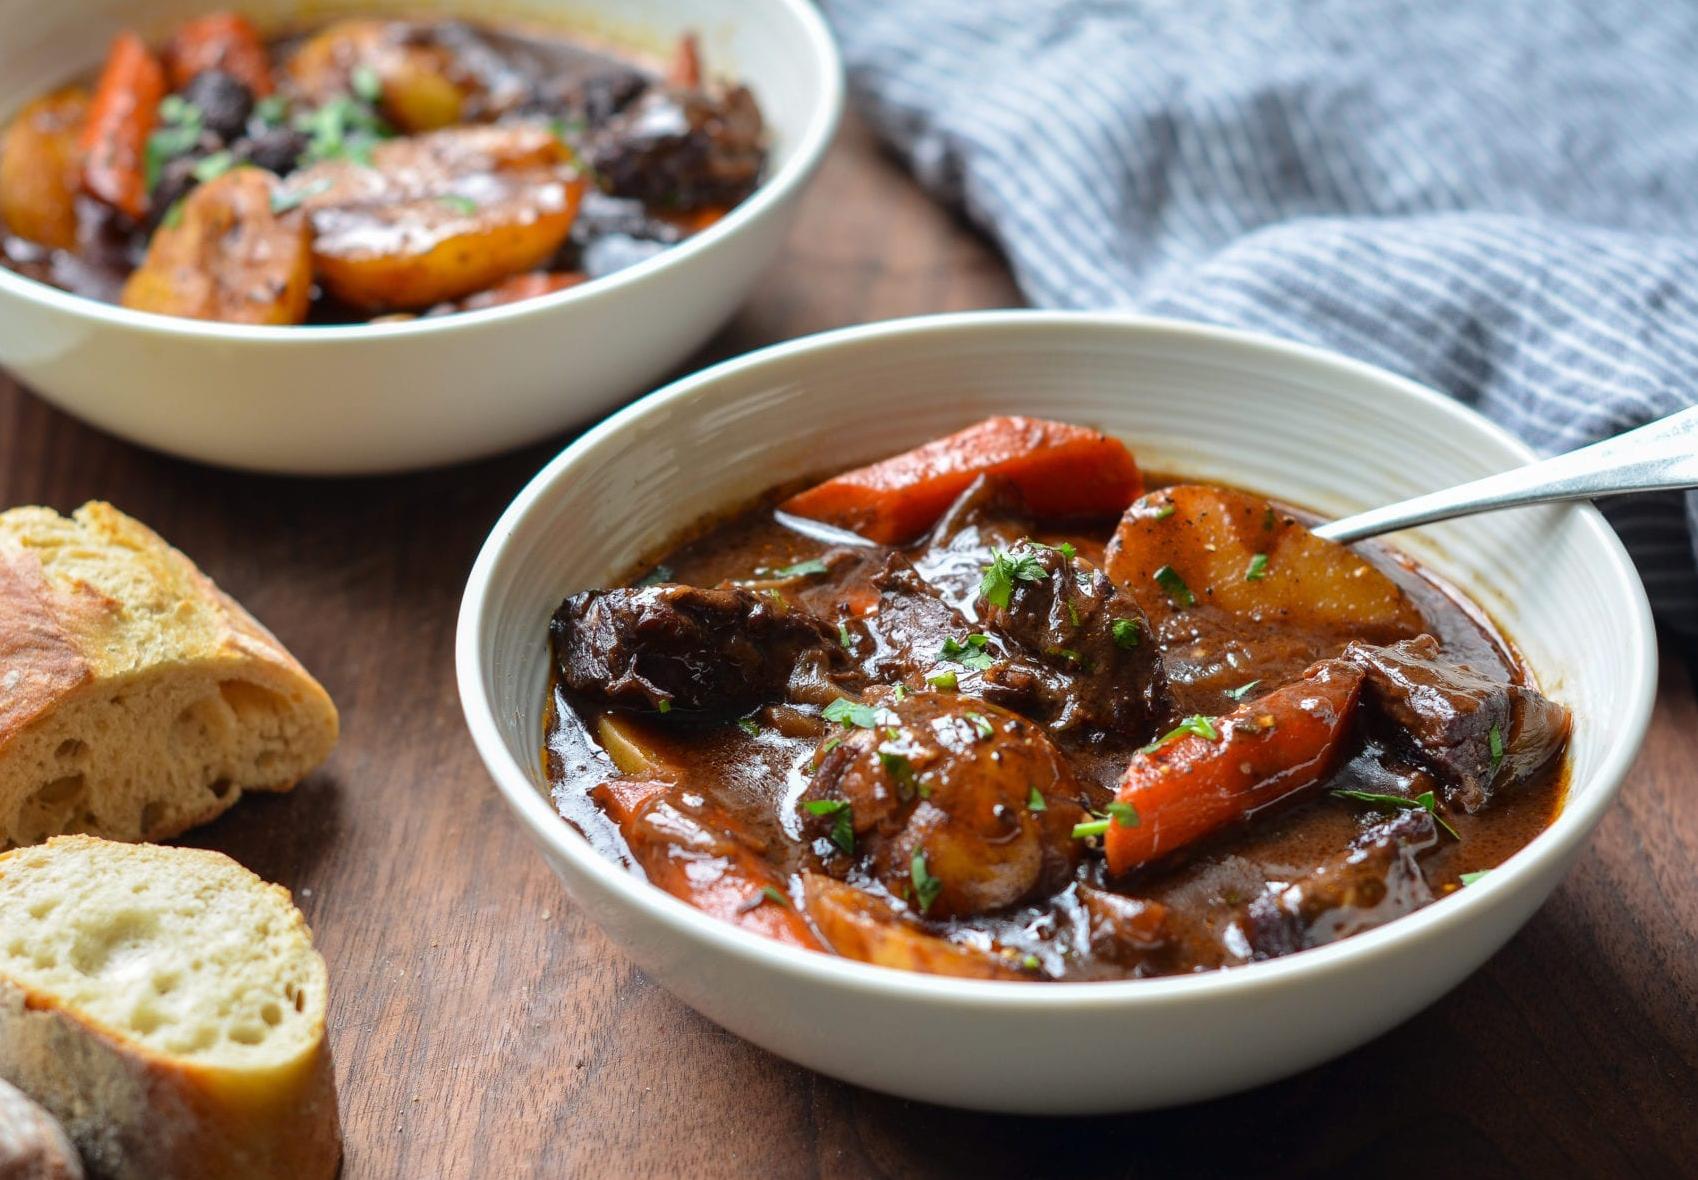  A hearty bowl of stew is the definition of pure comfort, especially when it’s cold outside.